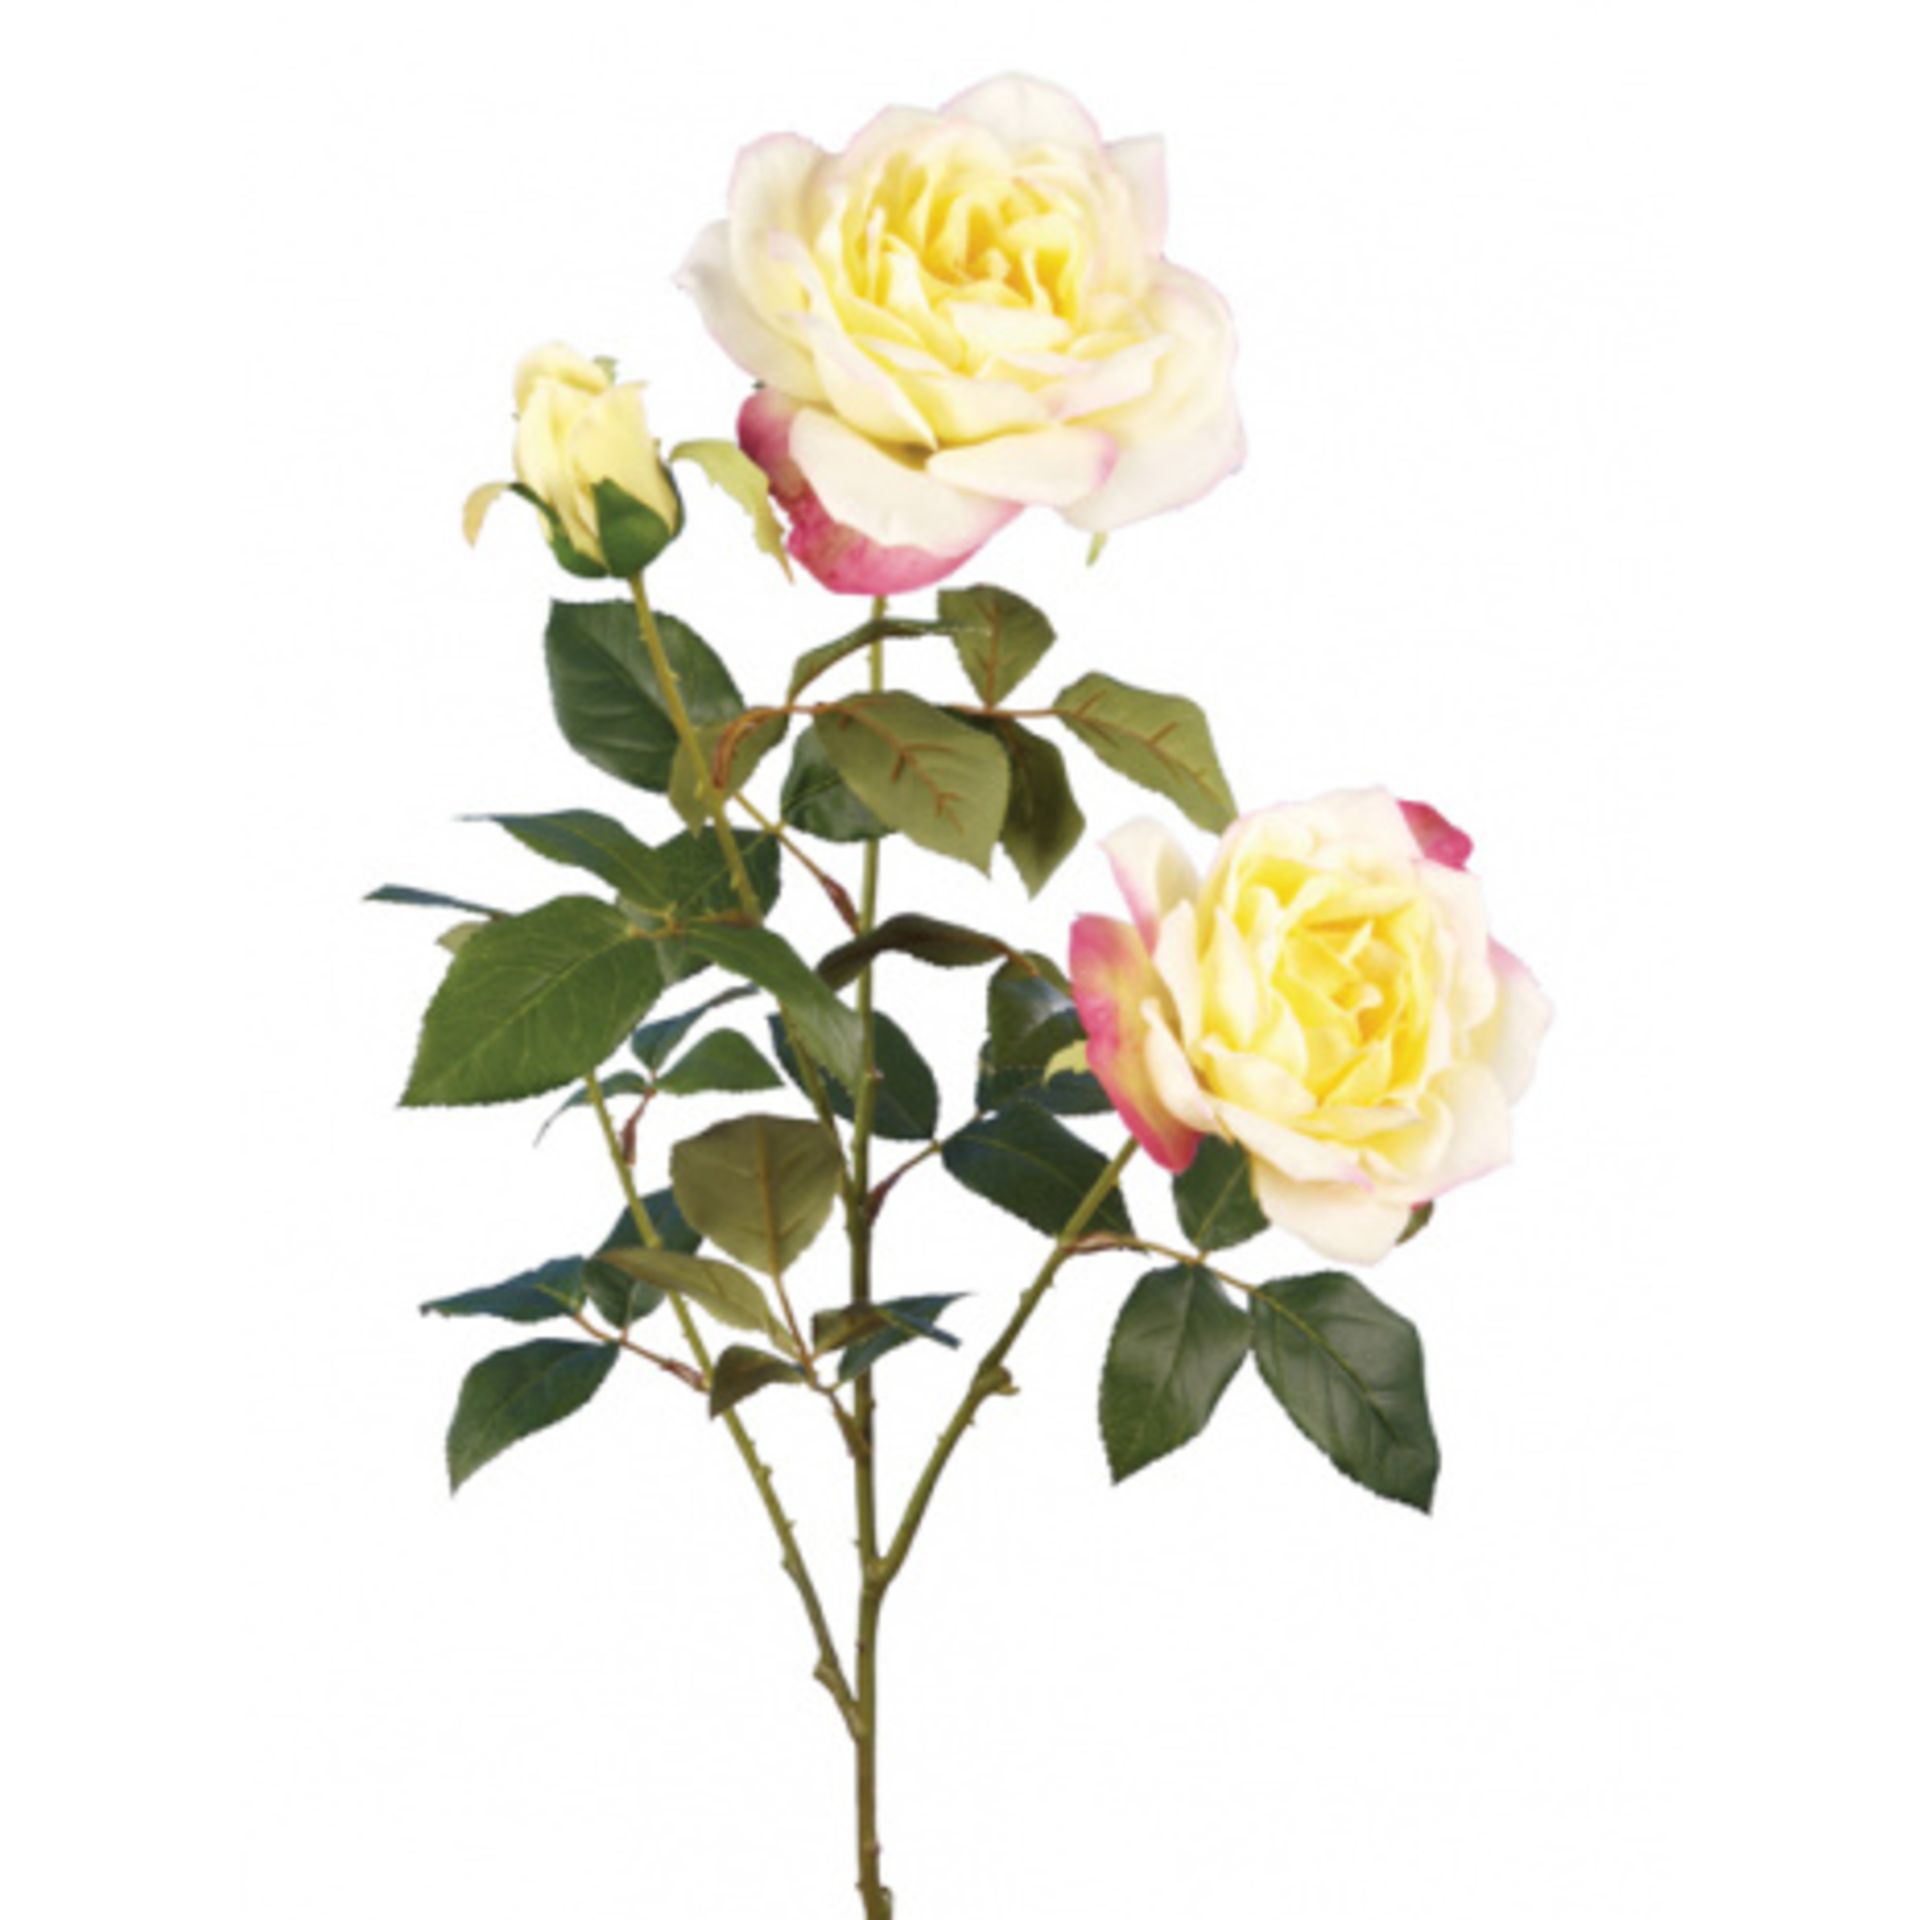 27 x Artificial Yellow Rose stem - 2 flowers, 1 bud - Image 2 of 2